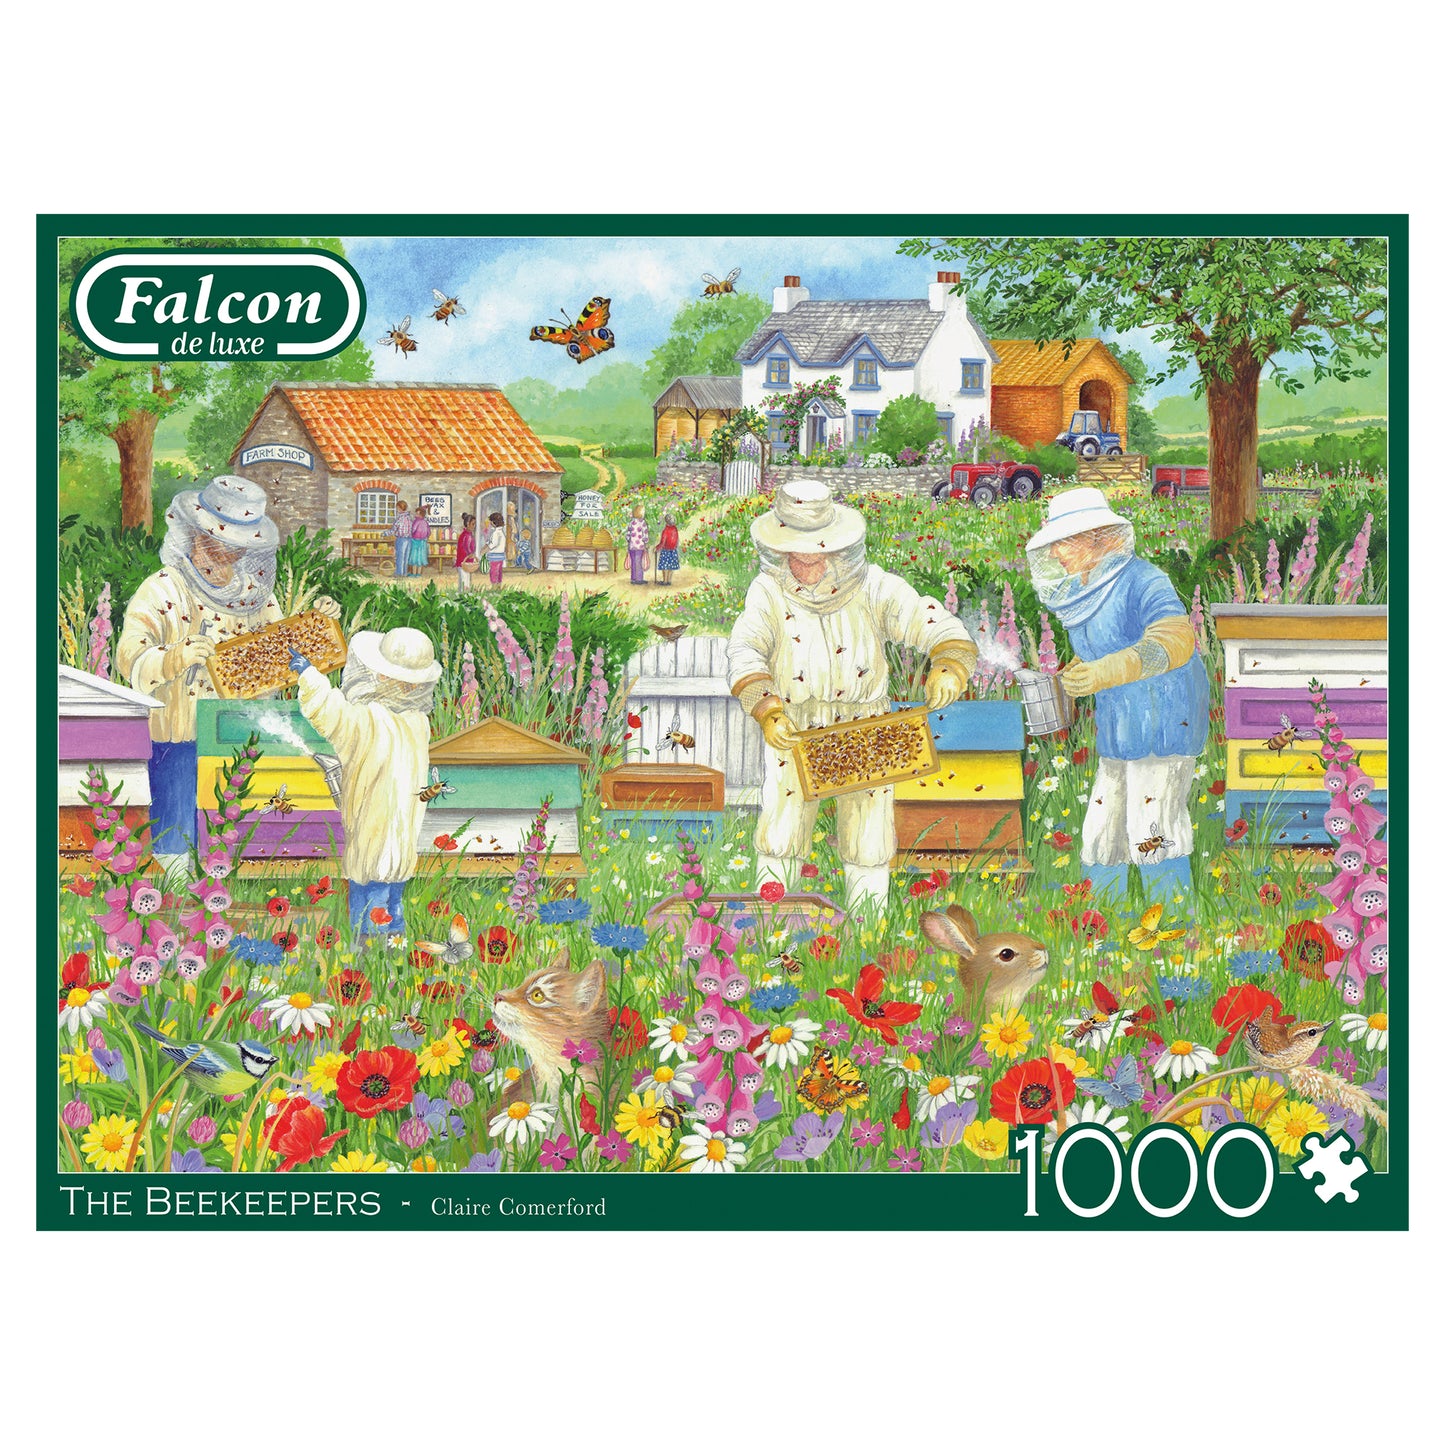 Falcon - The Beekeepers (1000 pieces) - product image - Jumboplay.com